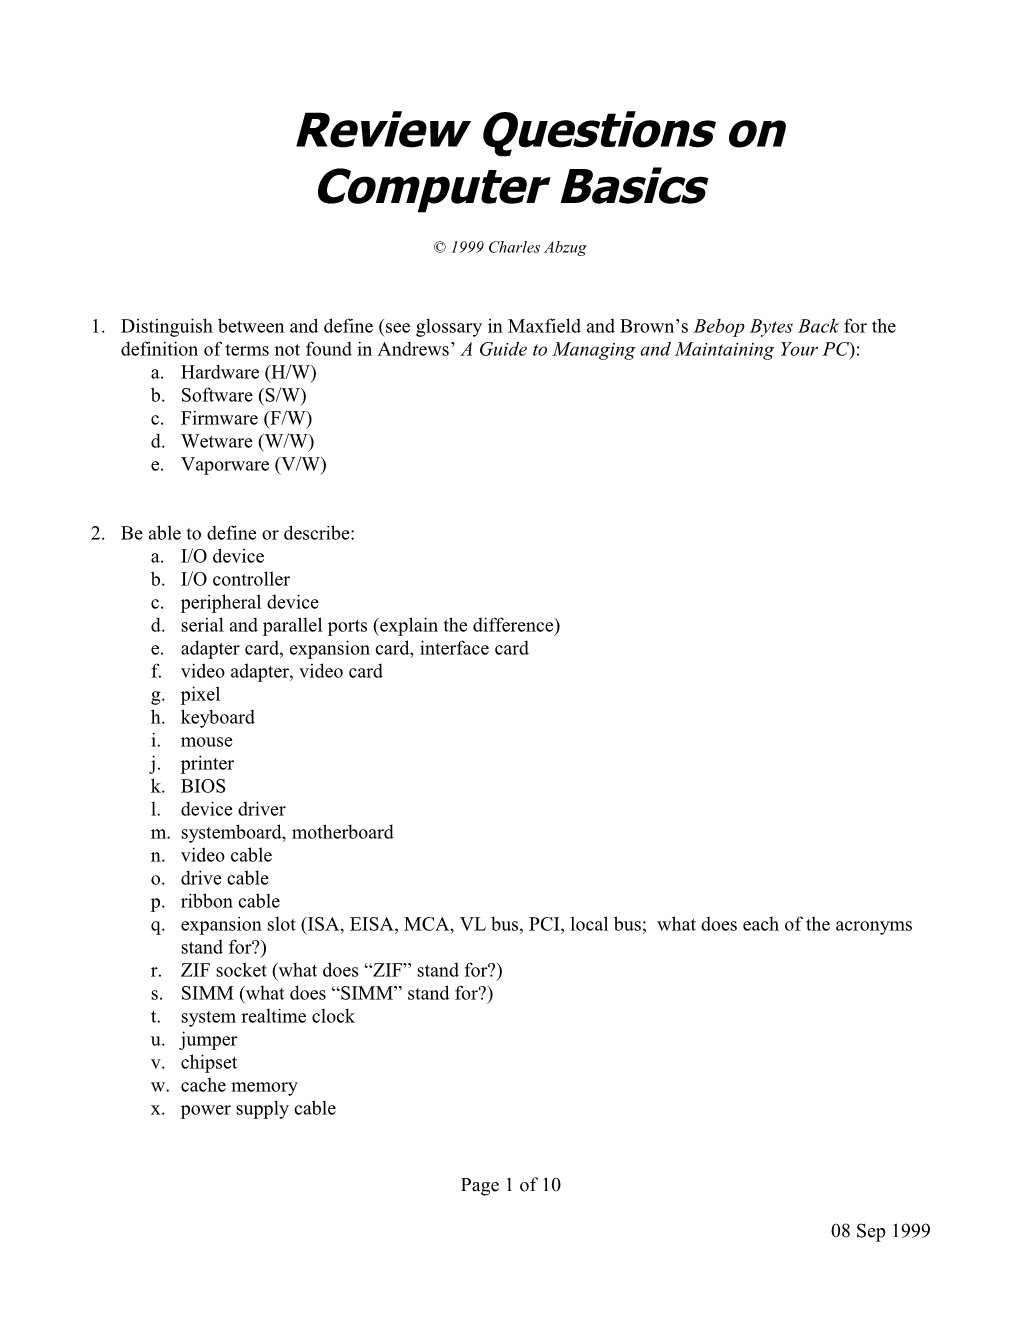 Review Questions on Computer Basics